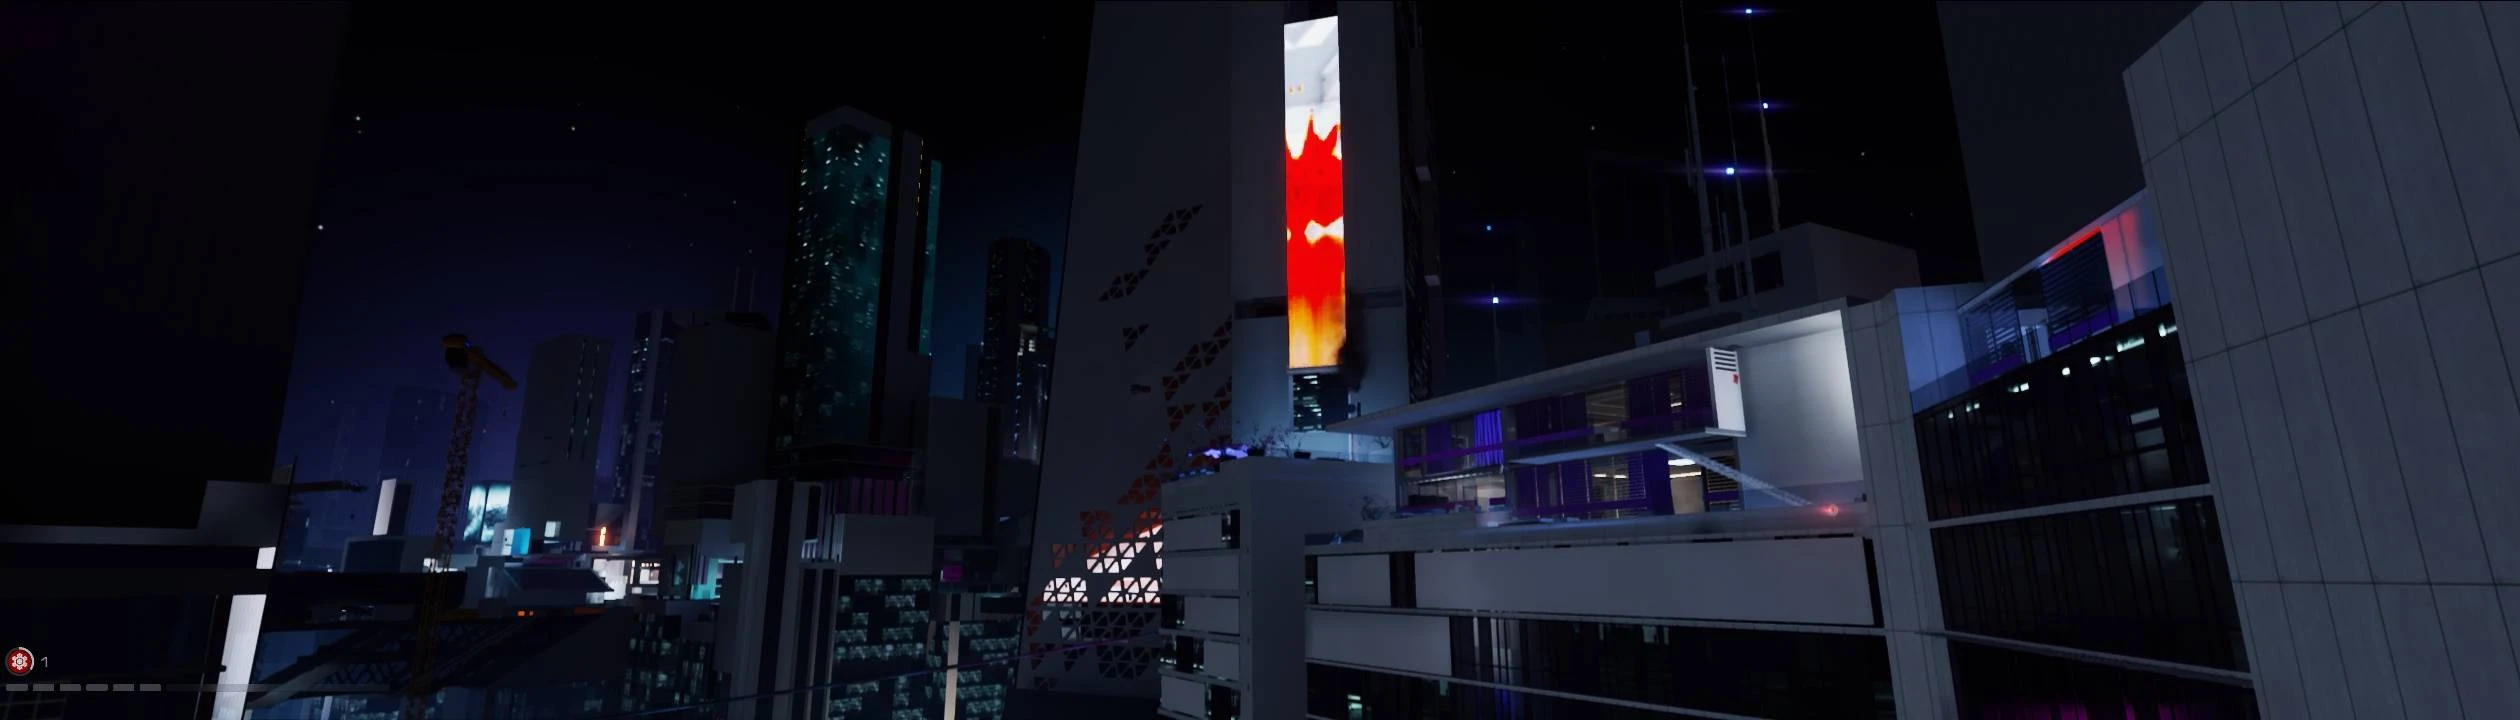 How to launch Mirror's Edge Catalyst with mods in 2023, Frosty Mod Manager